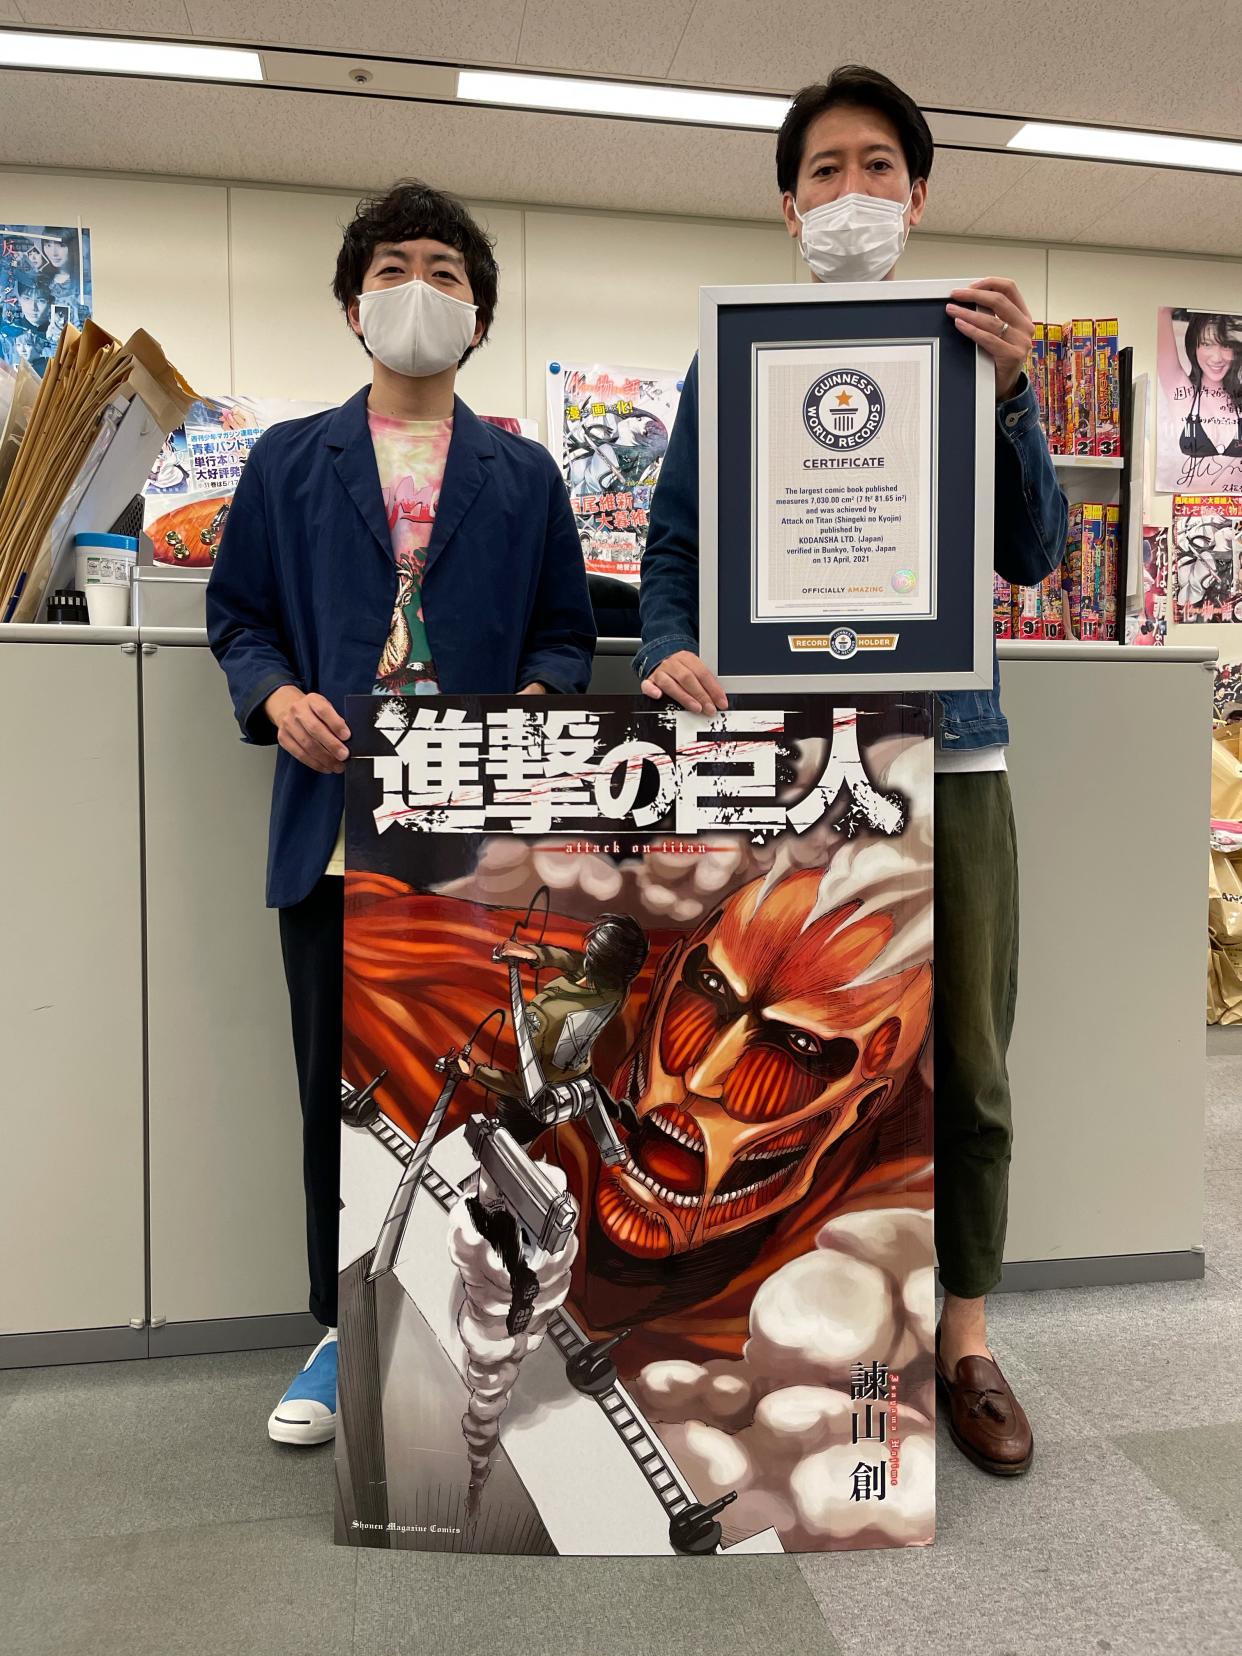 Attack On Titan giant manga is officially the world's largest comic book published. (Photo: Twitter/GWRJapan)